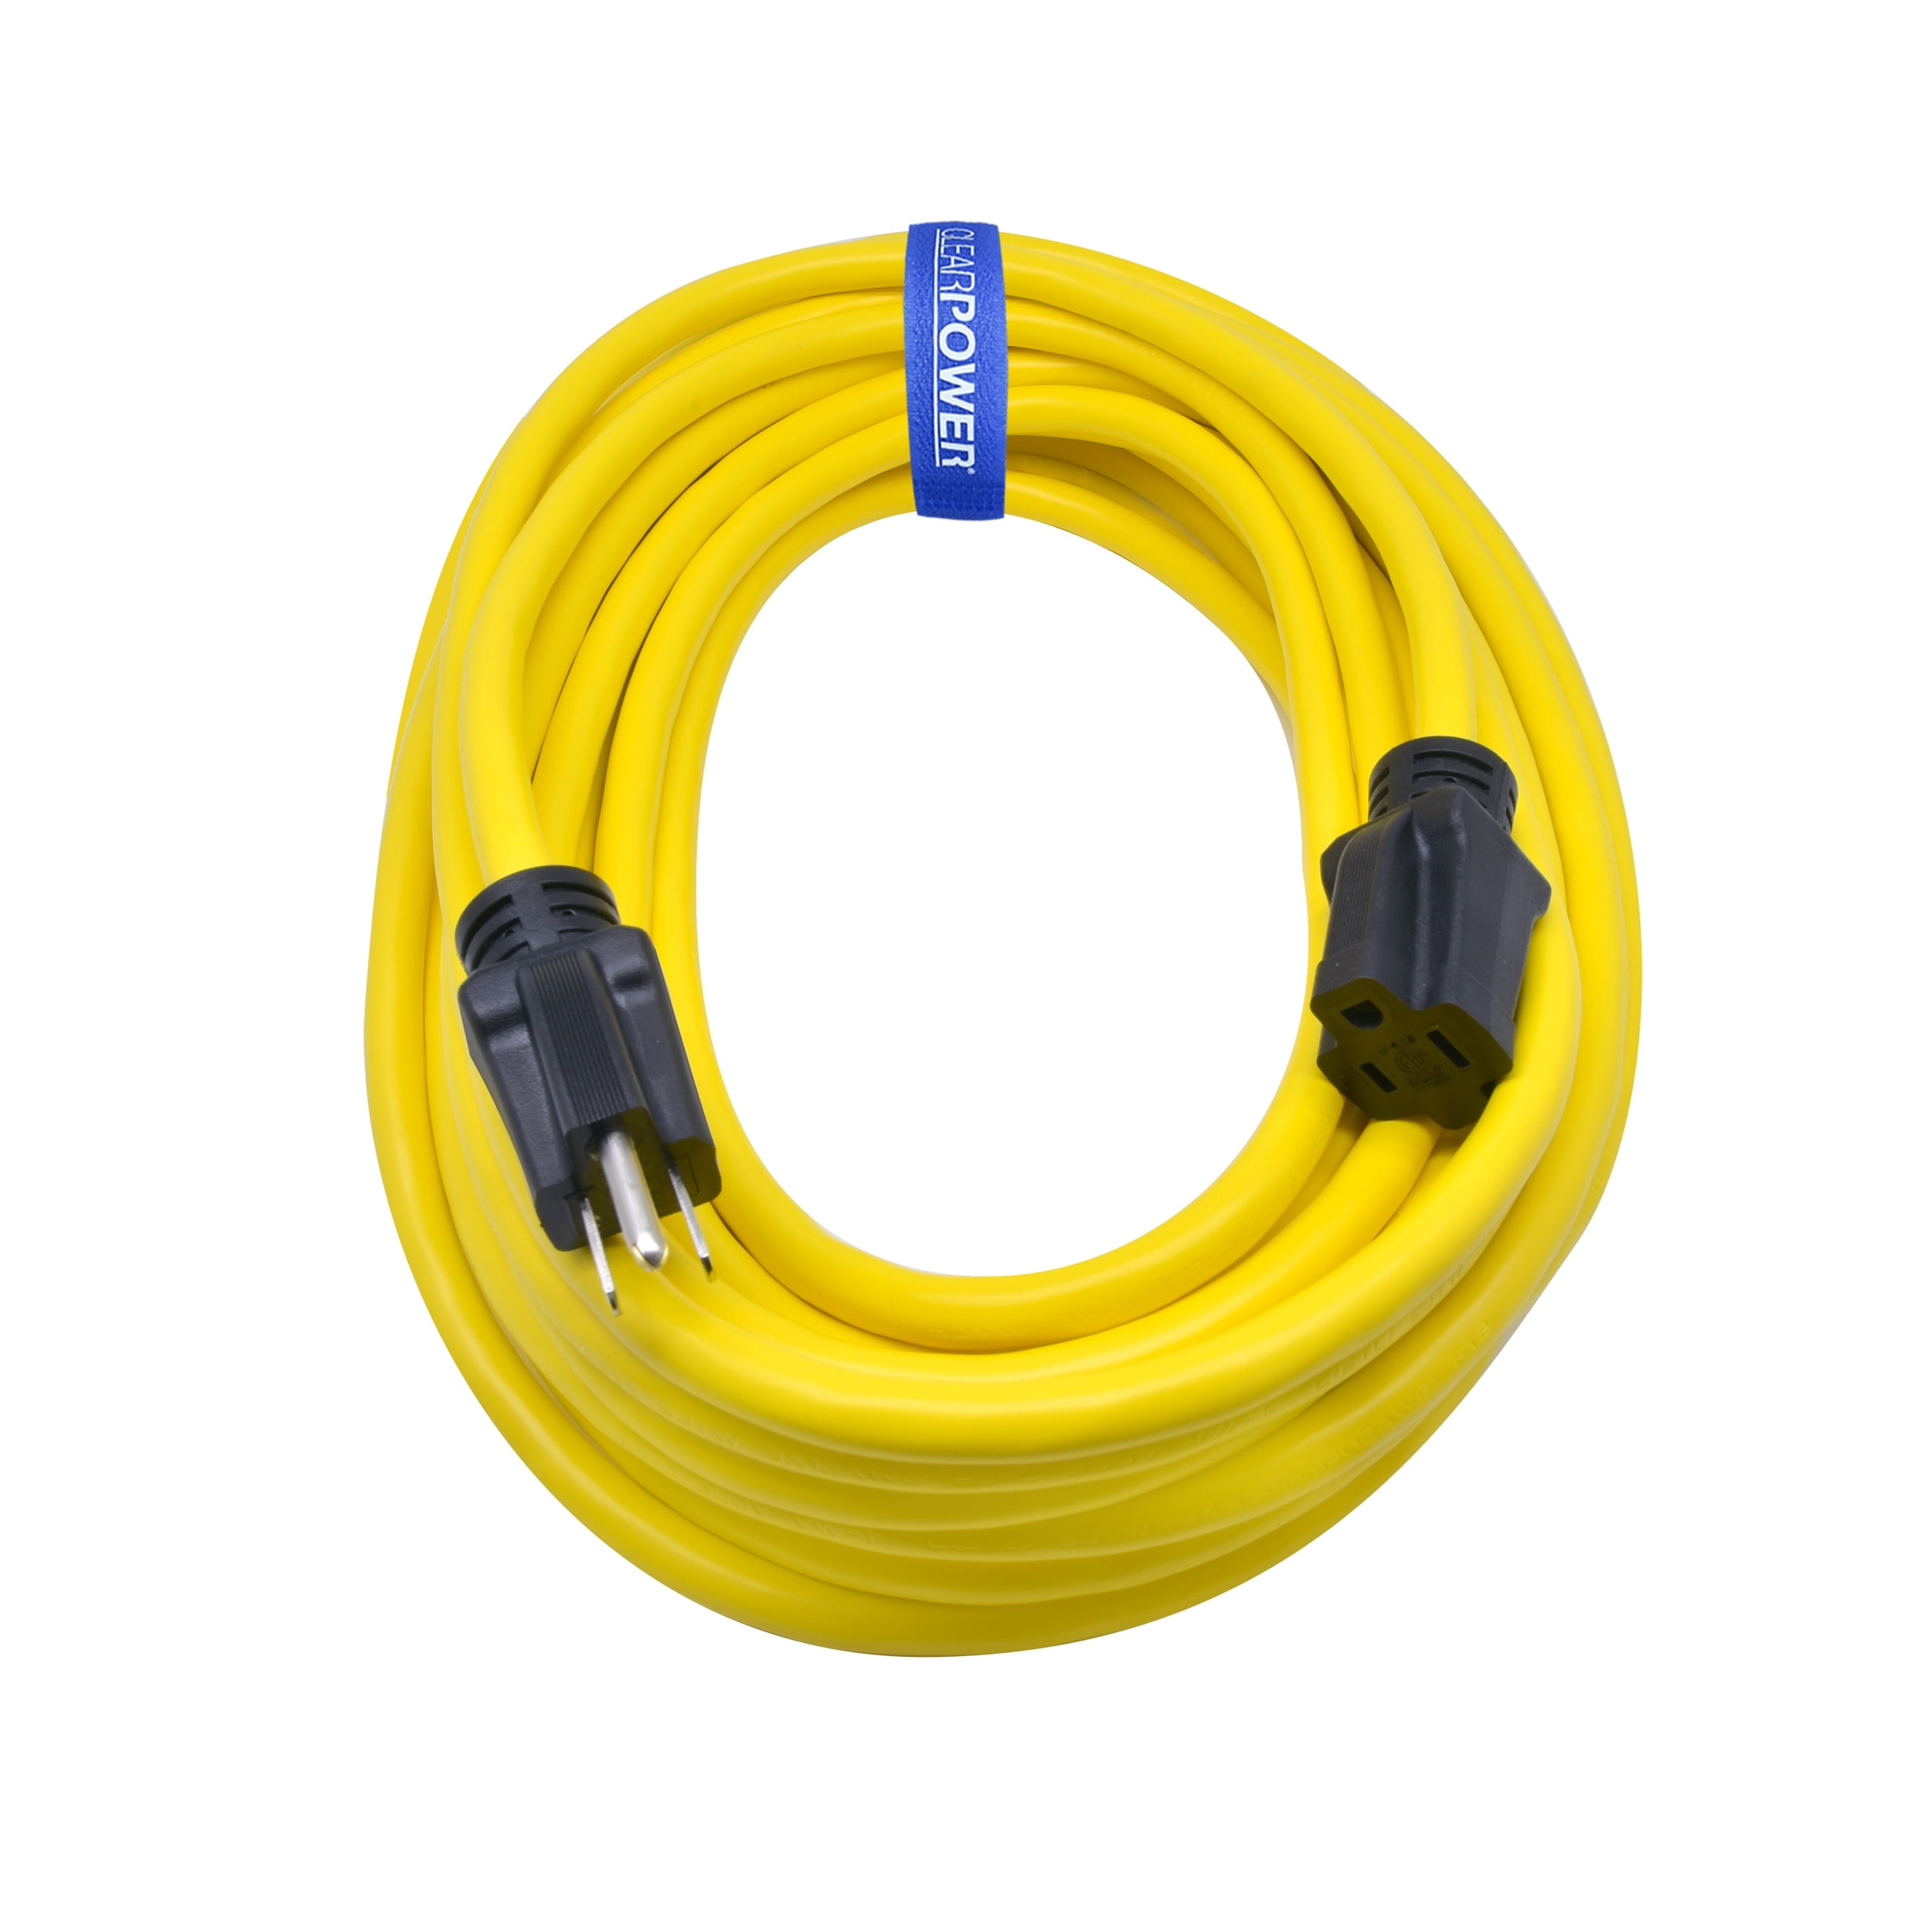 100 Foot Outdoor Extension Cord - 12/3 SJTW Heavy Duty Yellow 3 Prong  Extension Cable - Great for Garden and Major Appliances (100 Foot - Yellow)  